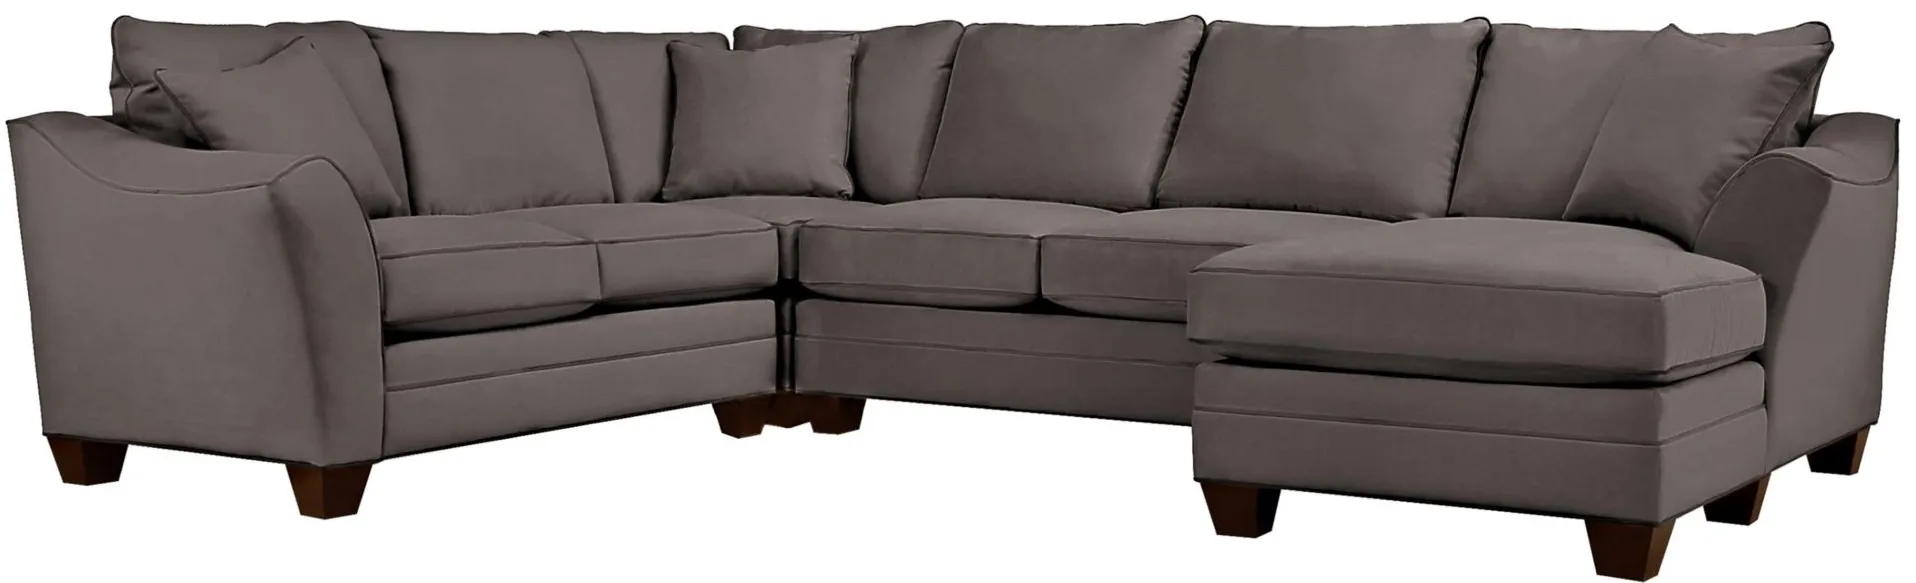 Foresthill 4-pc. Sectional w/ Right Arm Facing Chaise in Suede So Soft Slate by H.M. Richards